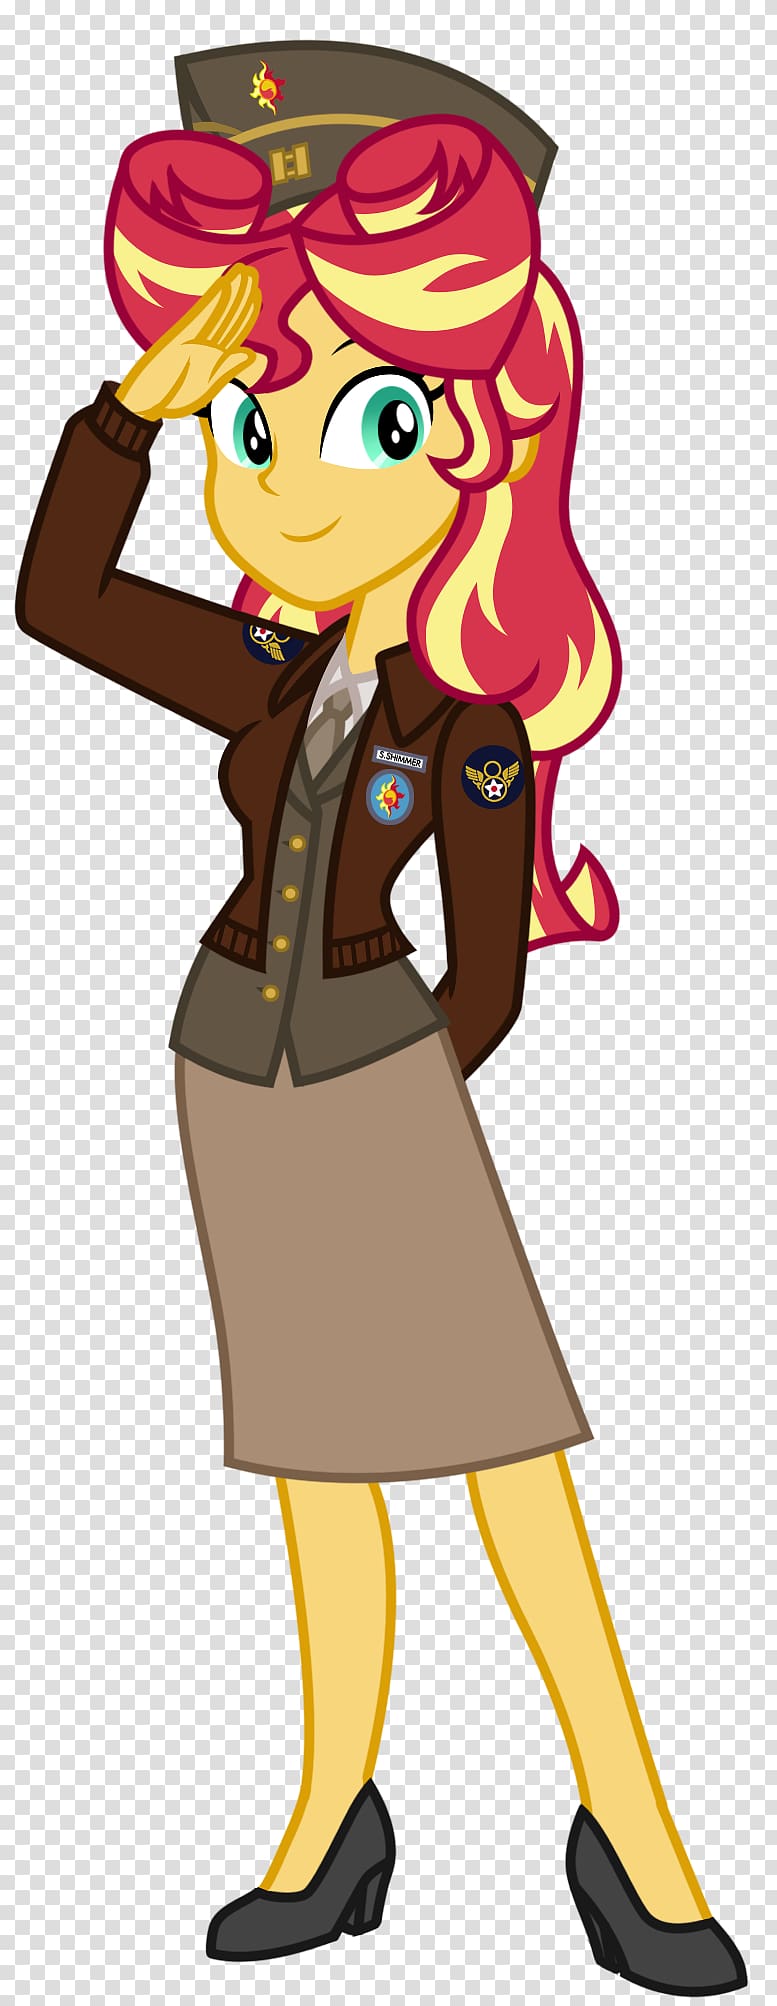 Sunset Shimmer Art United States Army Air Forces Equestria, Military Salute transparent background PNG clipart